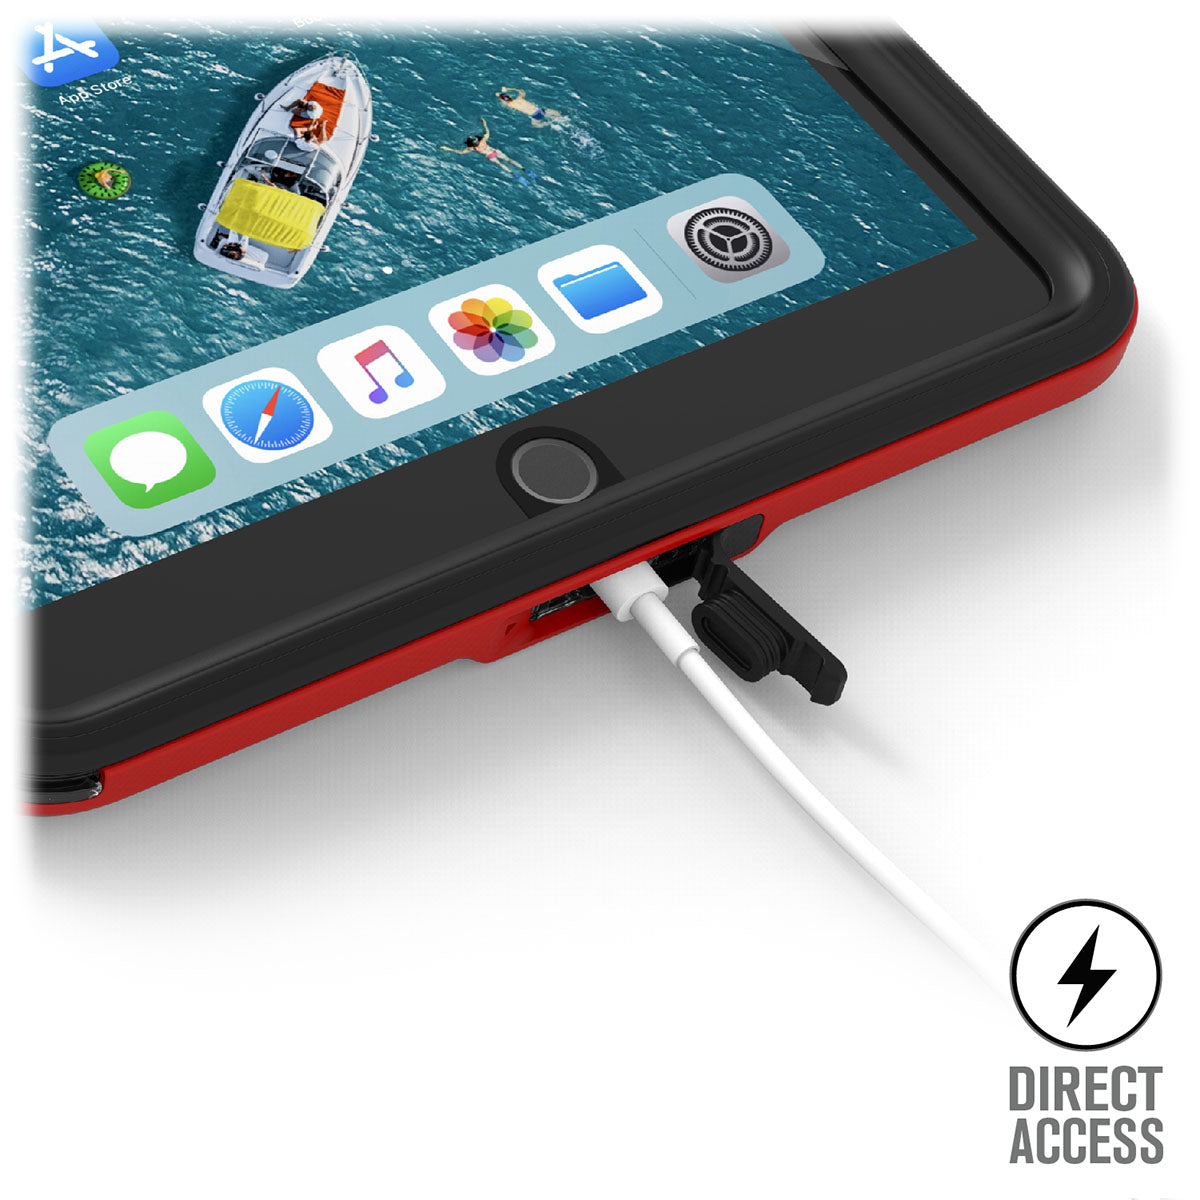 catalyst ipad air gen 3 10.5 waterproof case flame red plugged into the charging cable text reads direct access